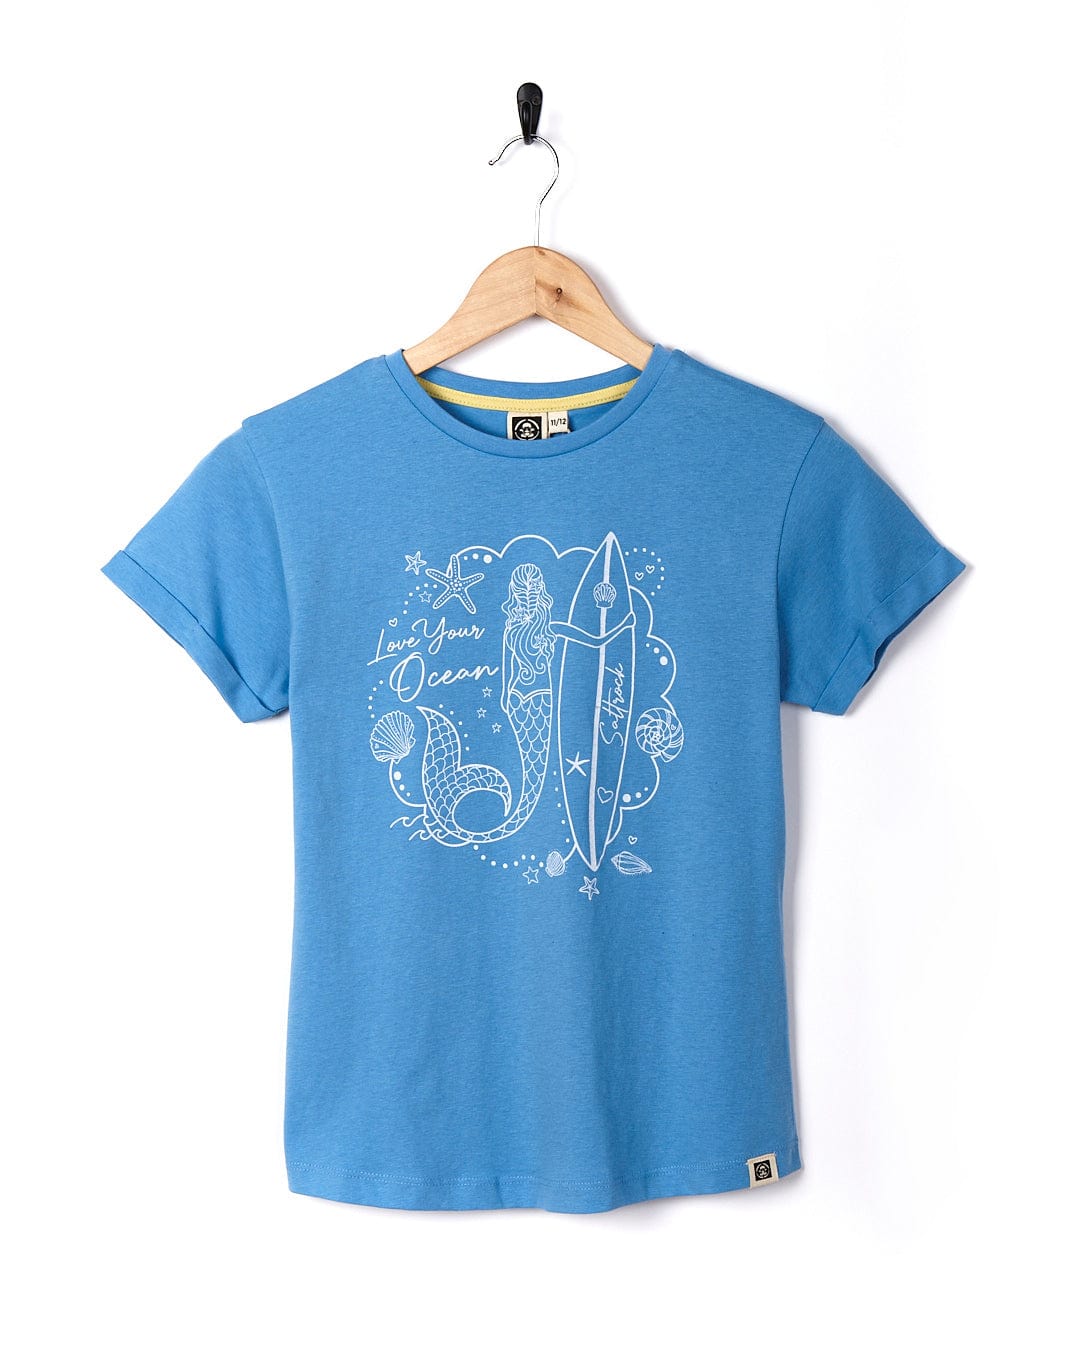 A Mermaid Surf - Kids Short Sleeve T-Shirt - Light Blue by Saltrock, perfect for those who love the surf lifestyle or are mer-people enthusiasts.